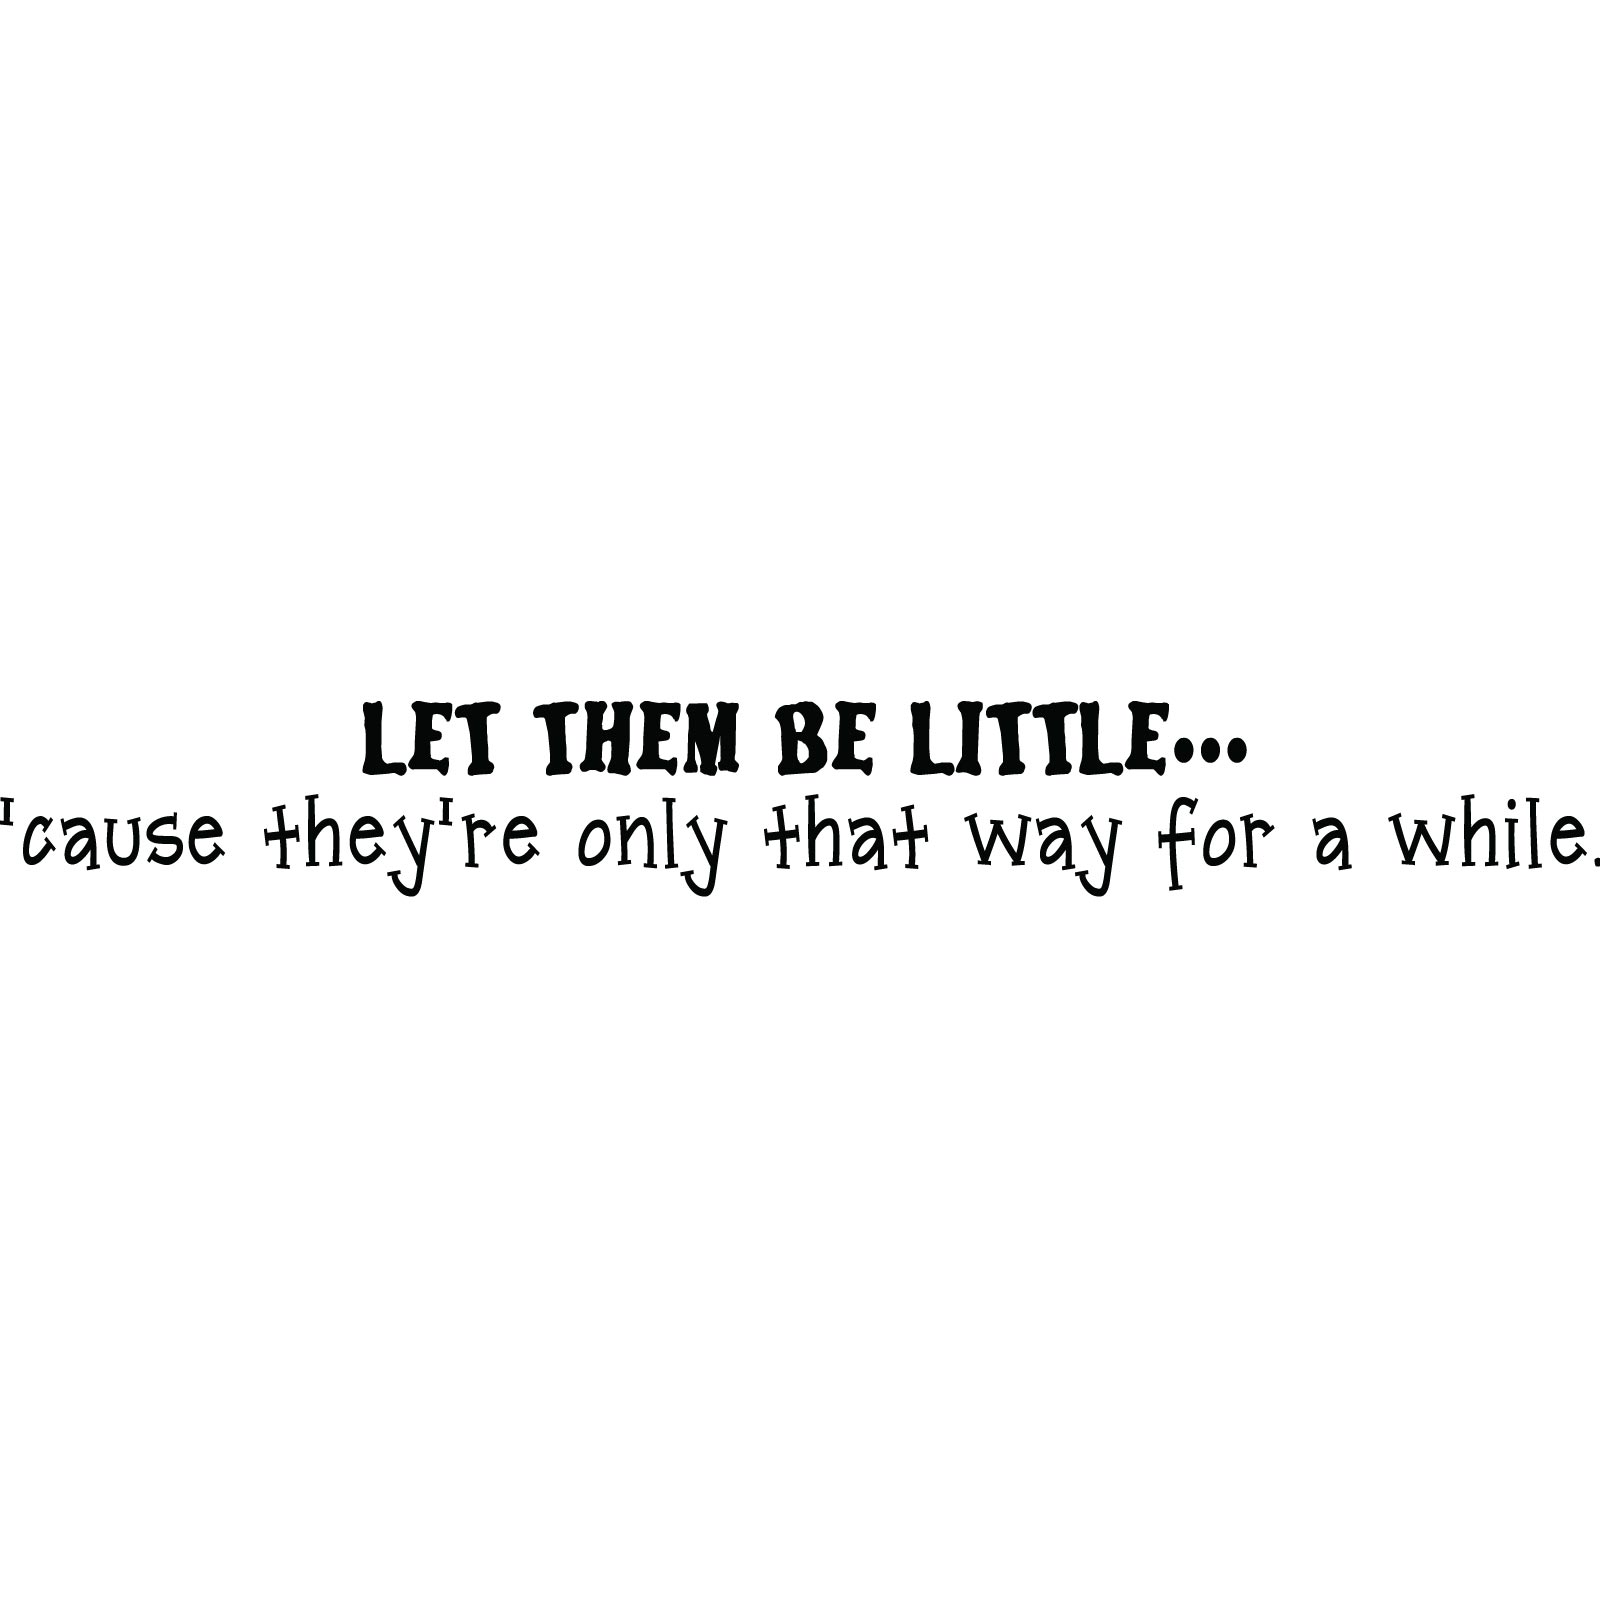 25 Let Them Be Little Quotes Images and Photos